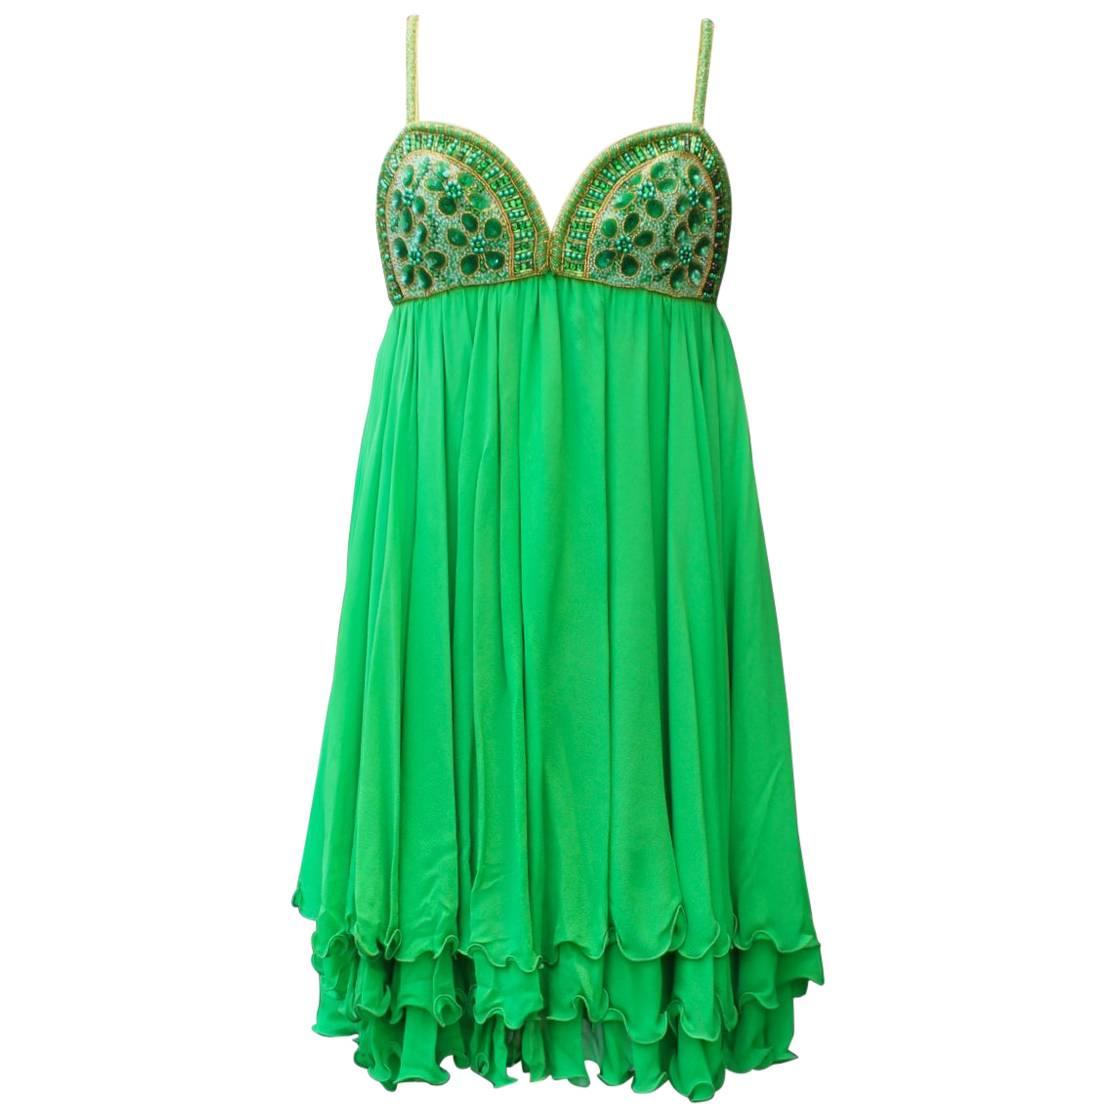 Serge Lepage Haute Couture embroidered green chiffon short dress, 1980s   For Sale